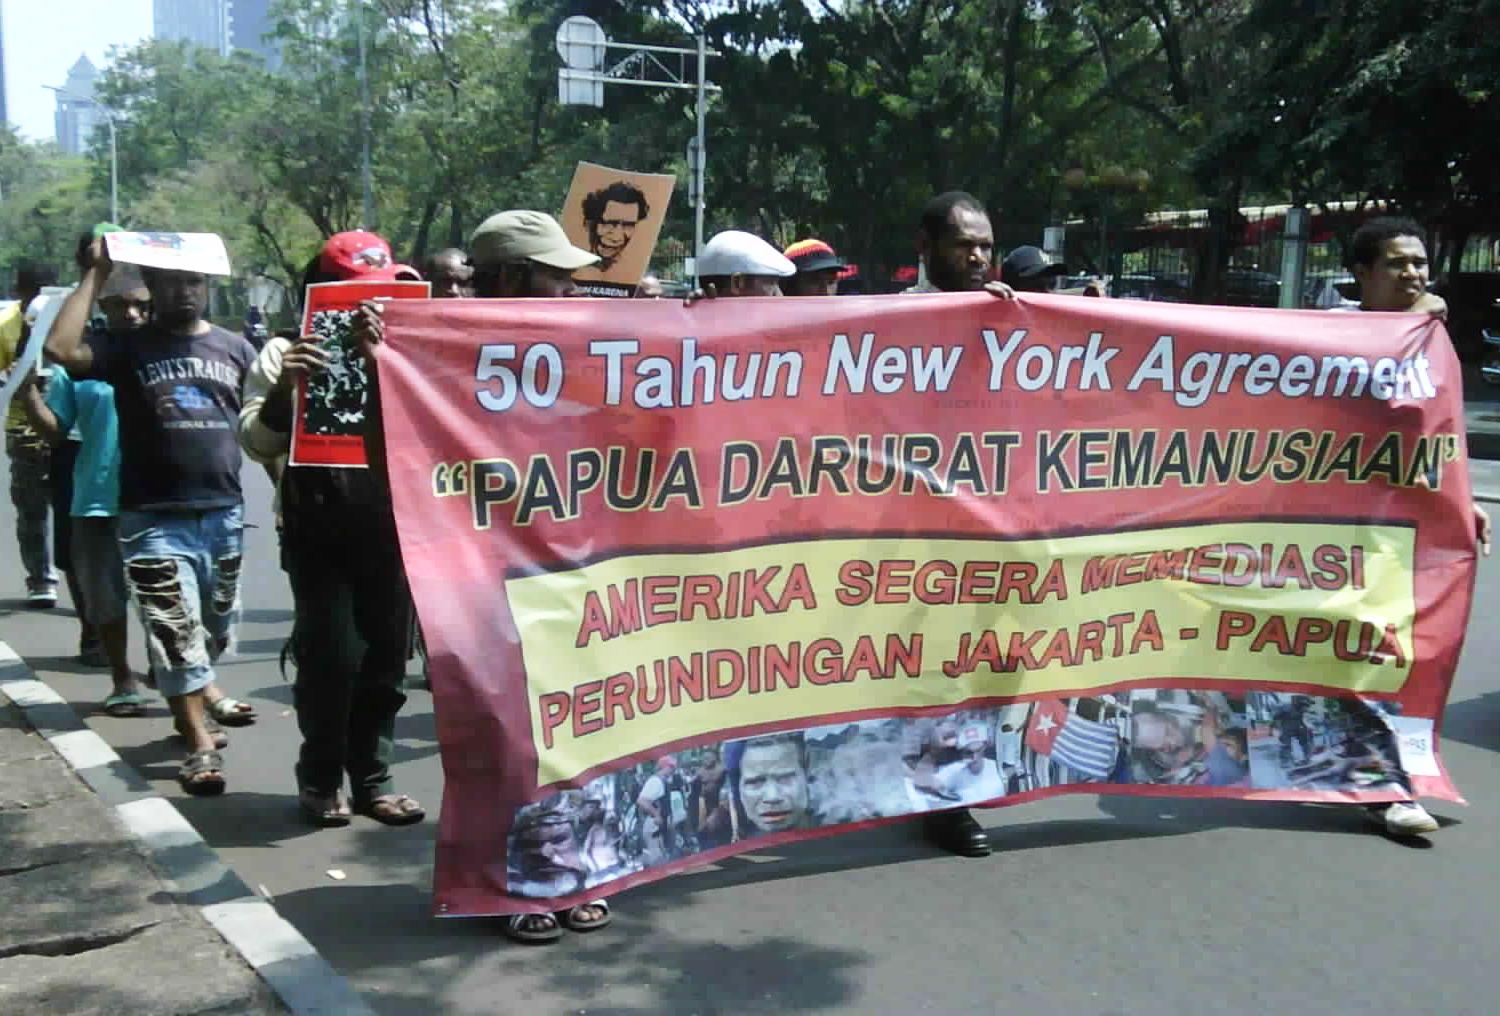 apuans protest at U.S. embassy in Jakarta, August 15, on 50th anniversary of signing New York Agreement.